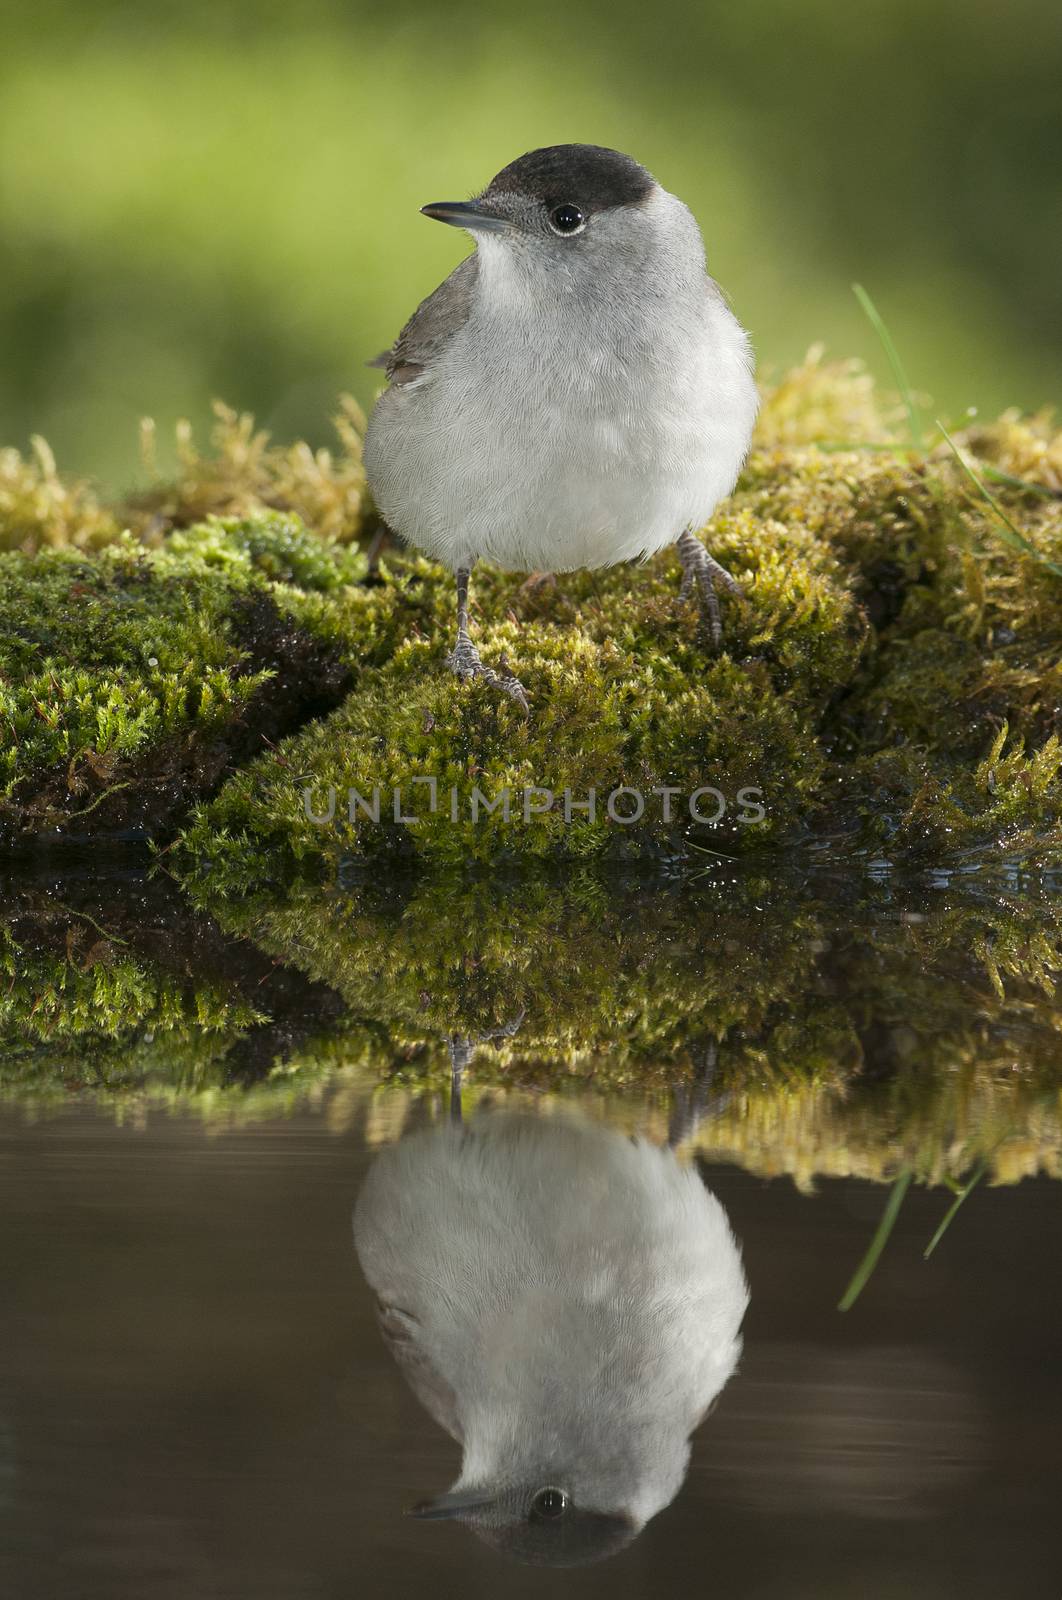 Blackcap (Sylvia atricapilla), in a drinking fountain, drinking  by jalonsohu@gmail.com